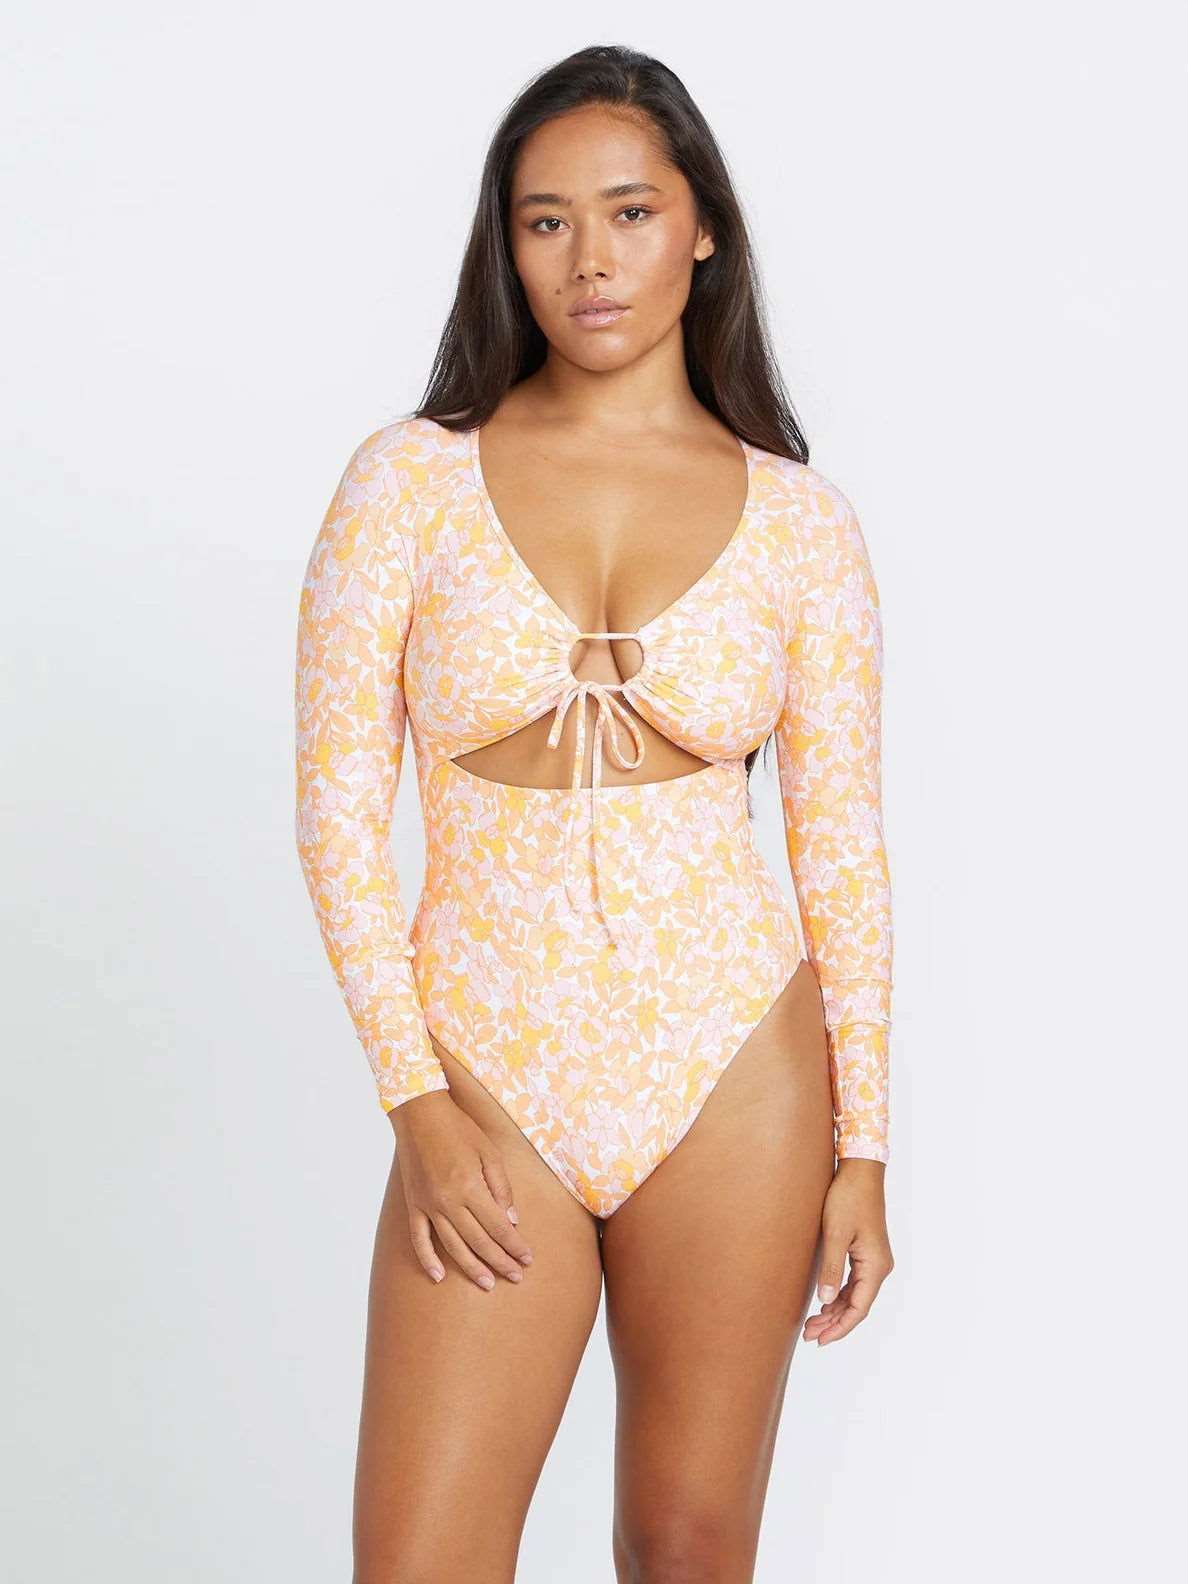 Volcom - Coco One Piece Swimsuit | Melon -  - Married to the Sea Surf Shop - 